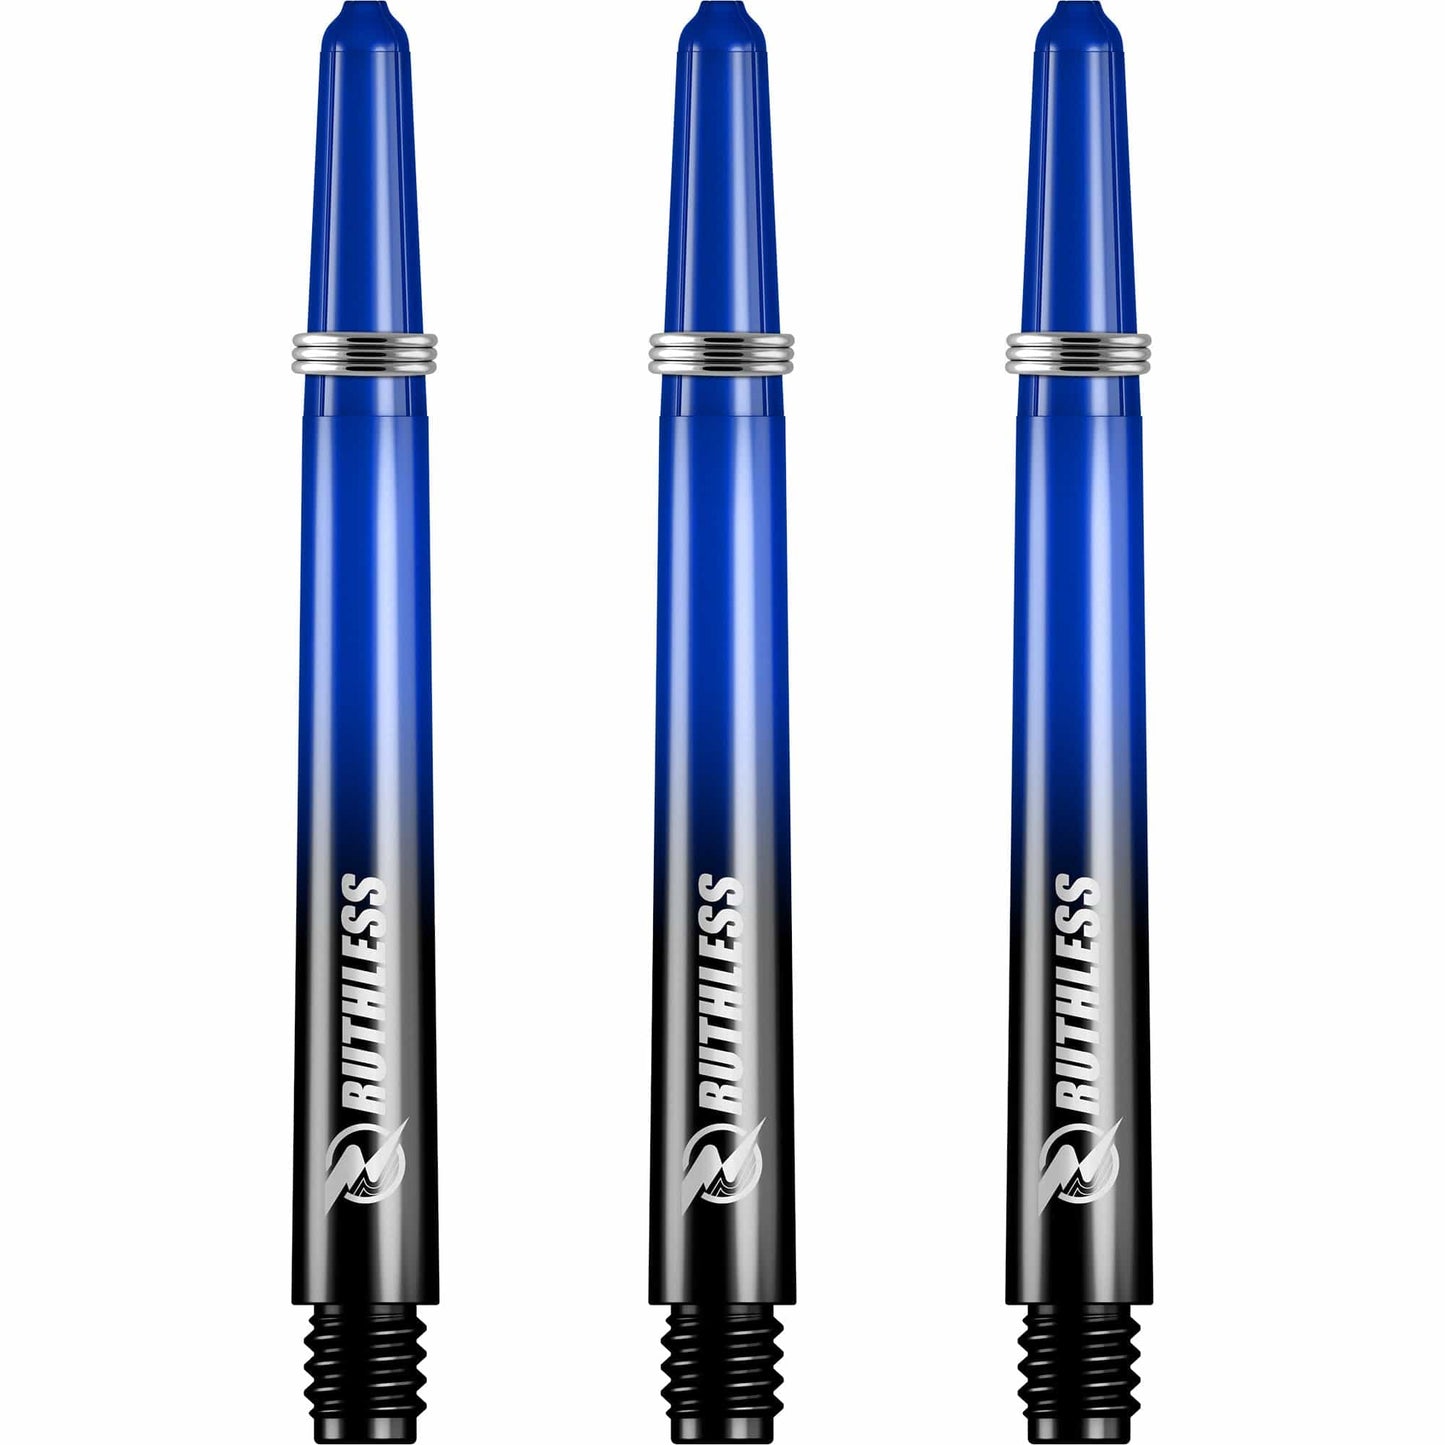 Ruthless Deflectagrip Plus Dart Shafts - Polycarbonate Stems with Springs - Blue Medium